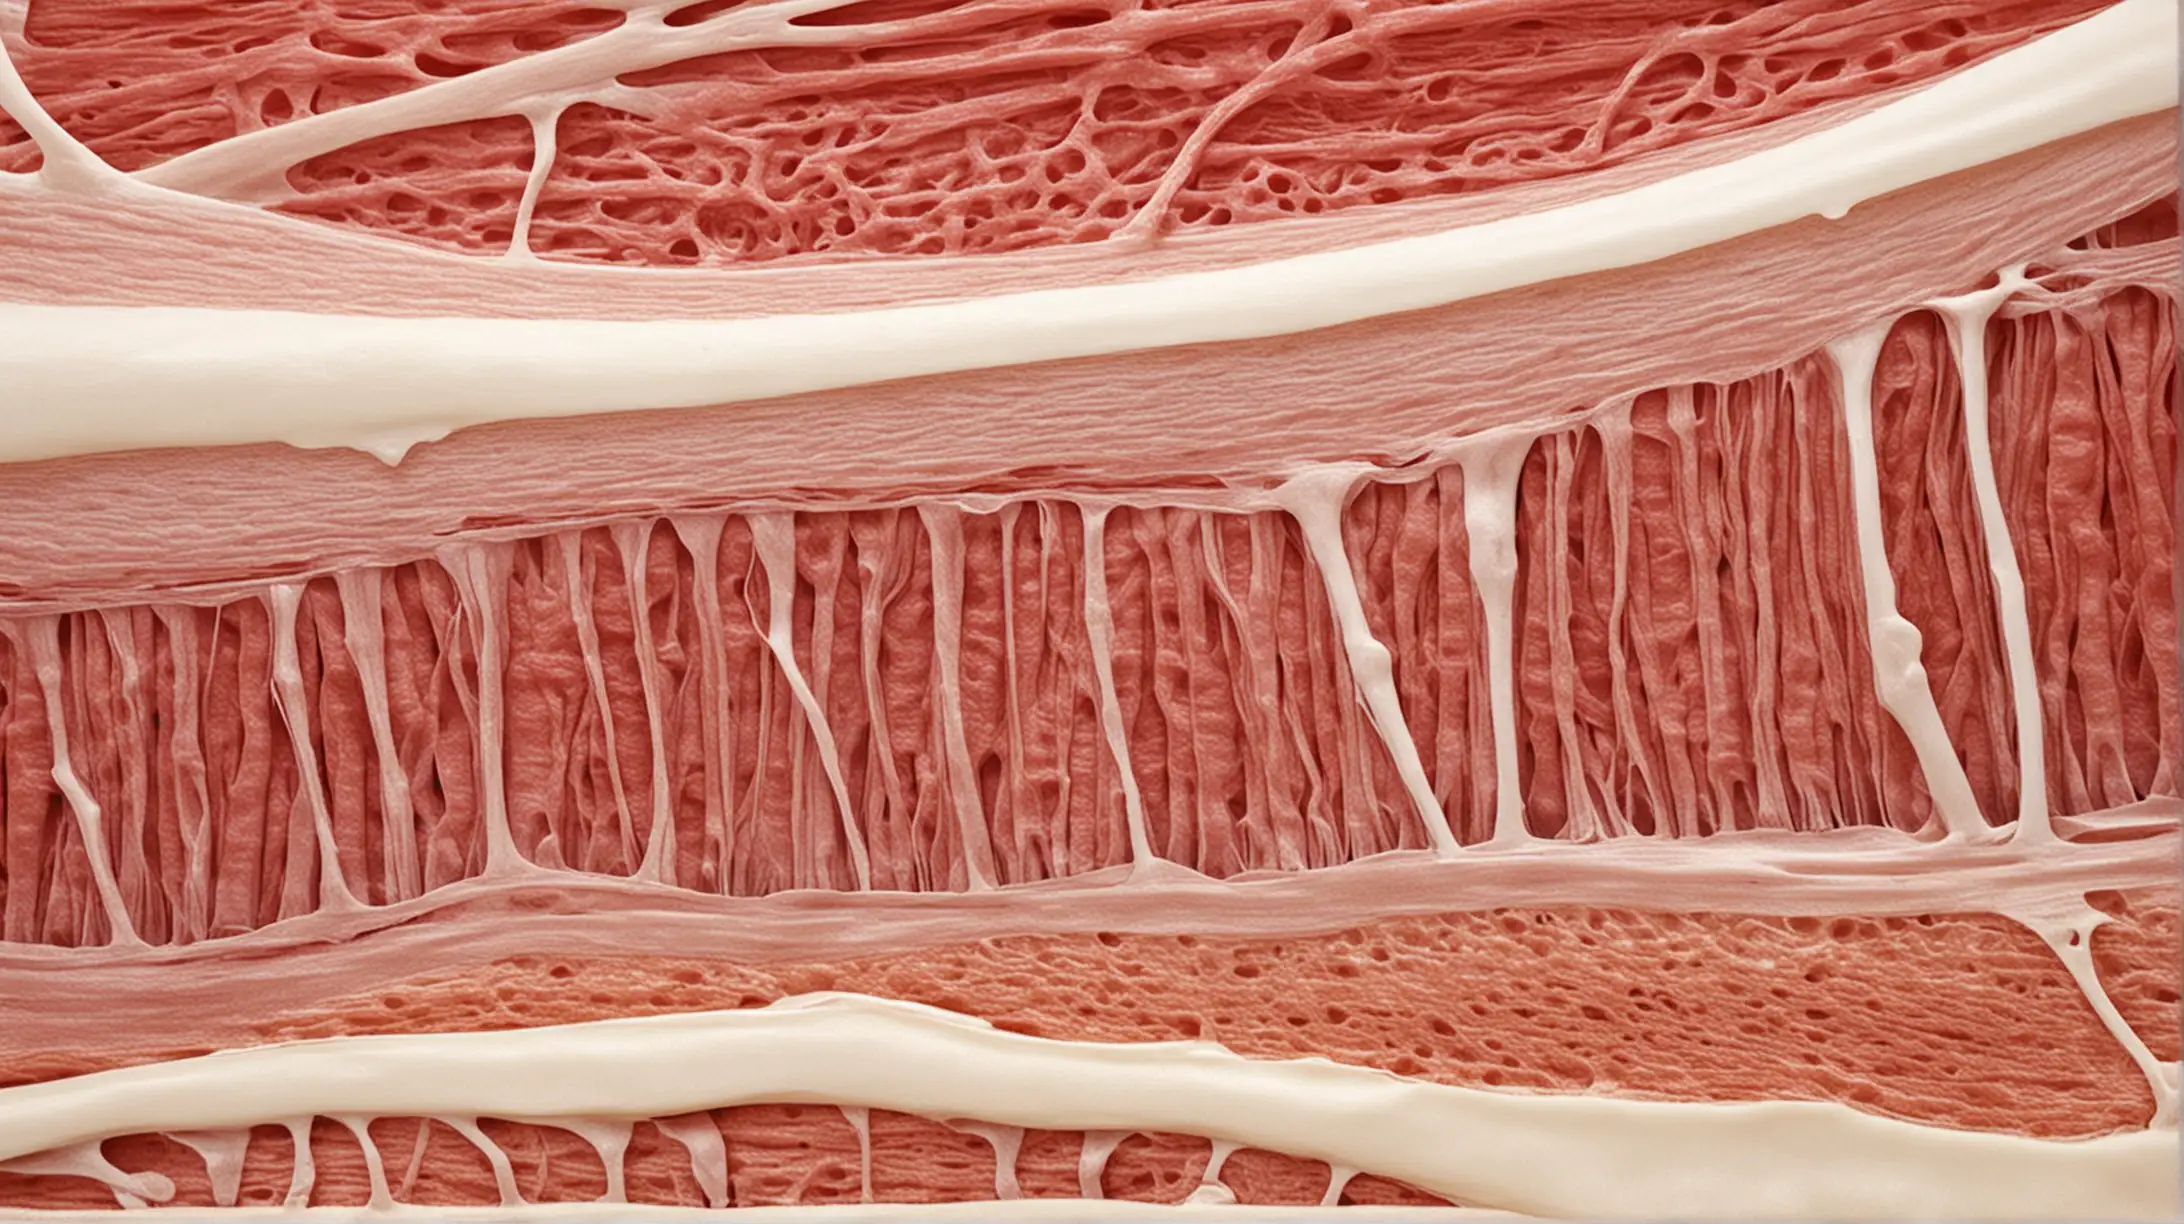 Anatomical Illustration of Bone and Muscle Tissue